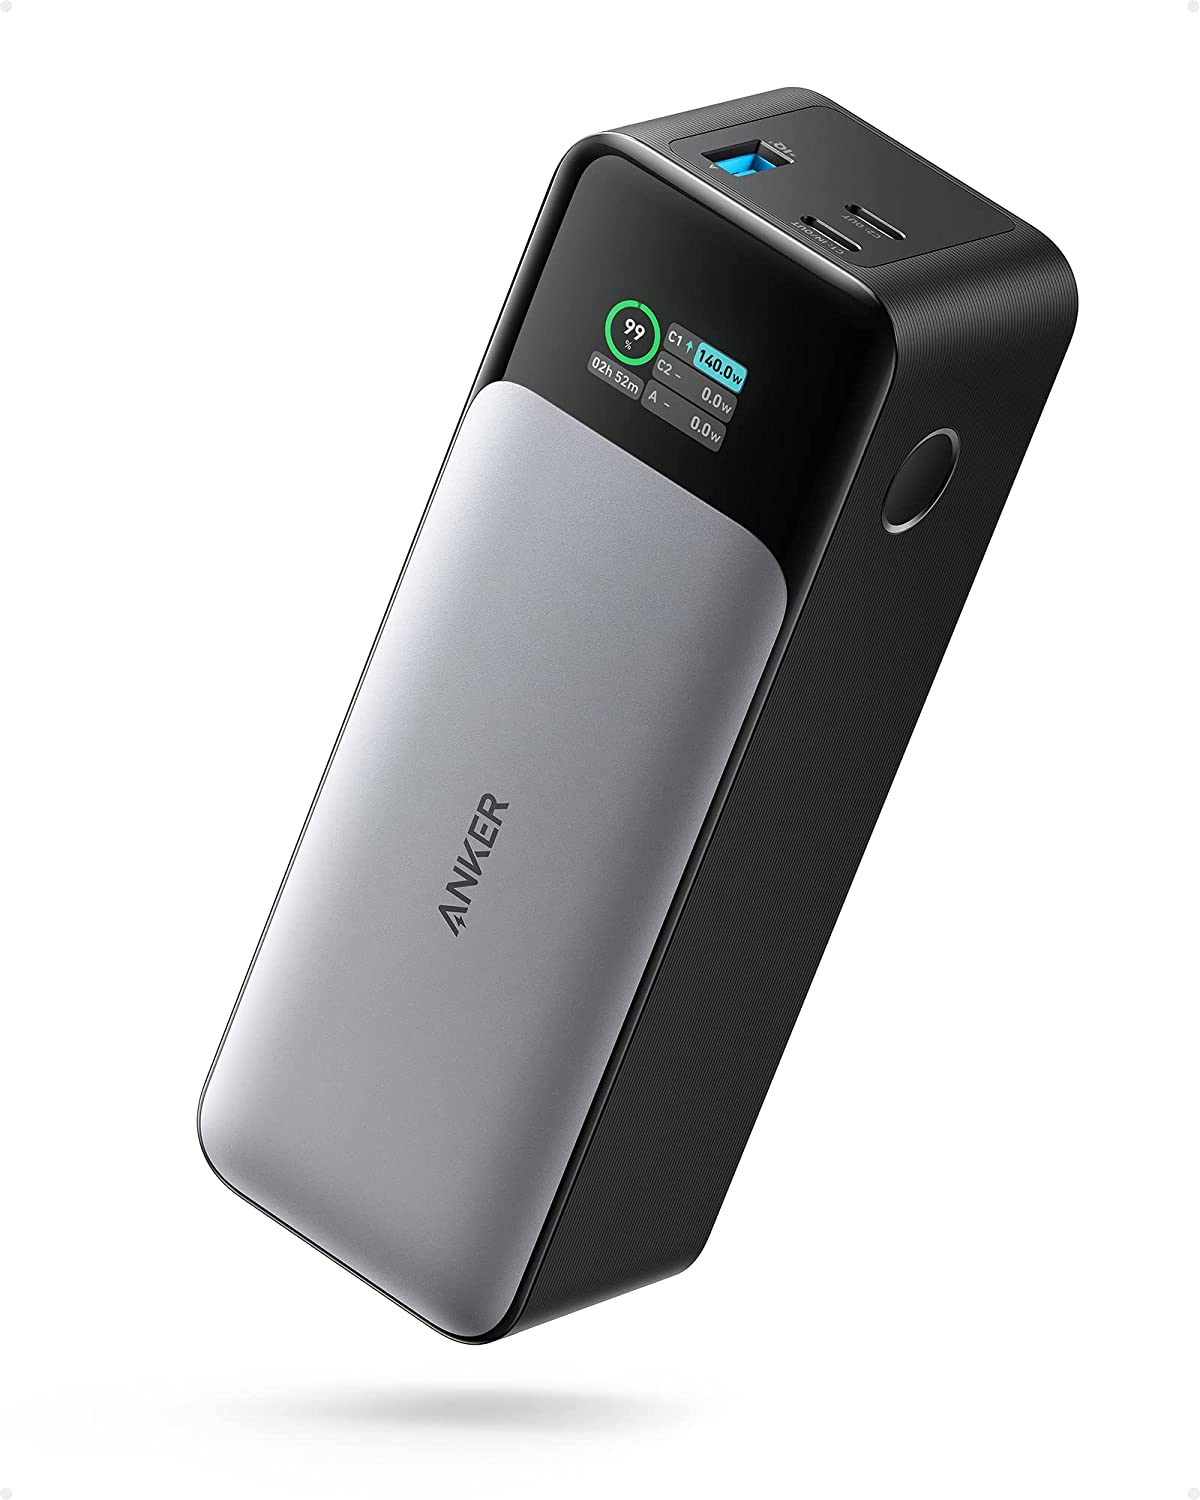 Anker 737 Power Bank Port Portable Charger $149.99